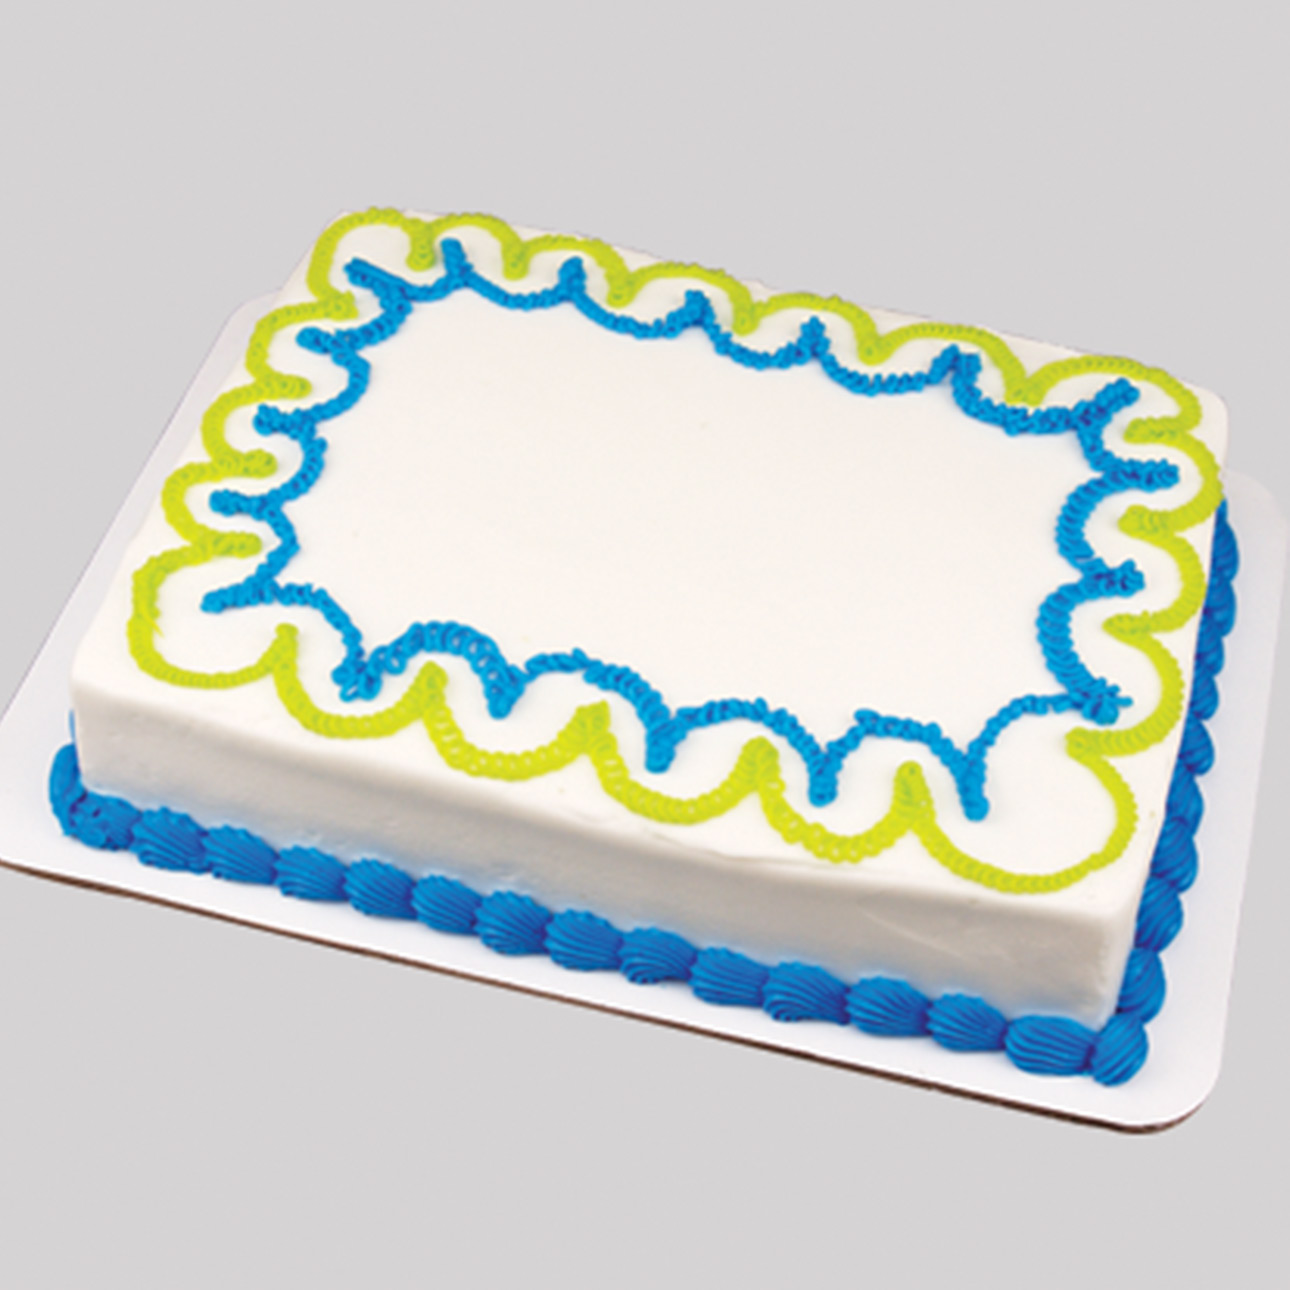 Piece of Cake Birthday Cake - Cute Buttons Gift and Paper Boutique